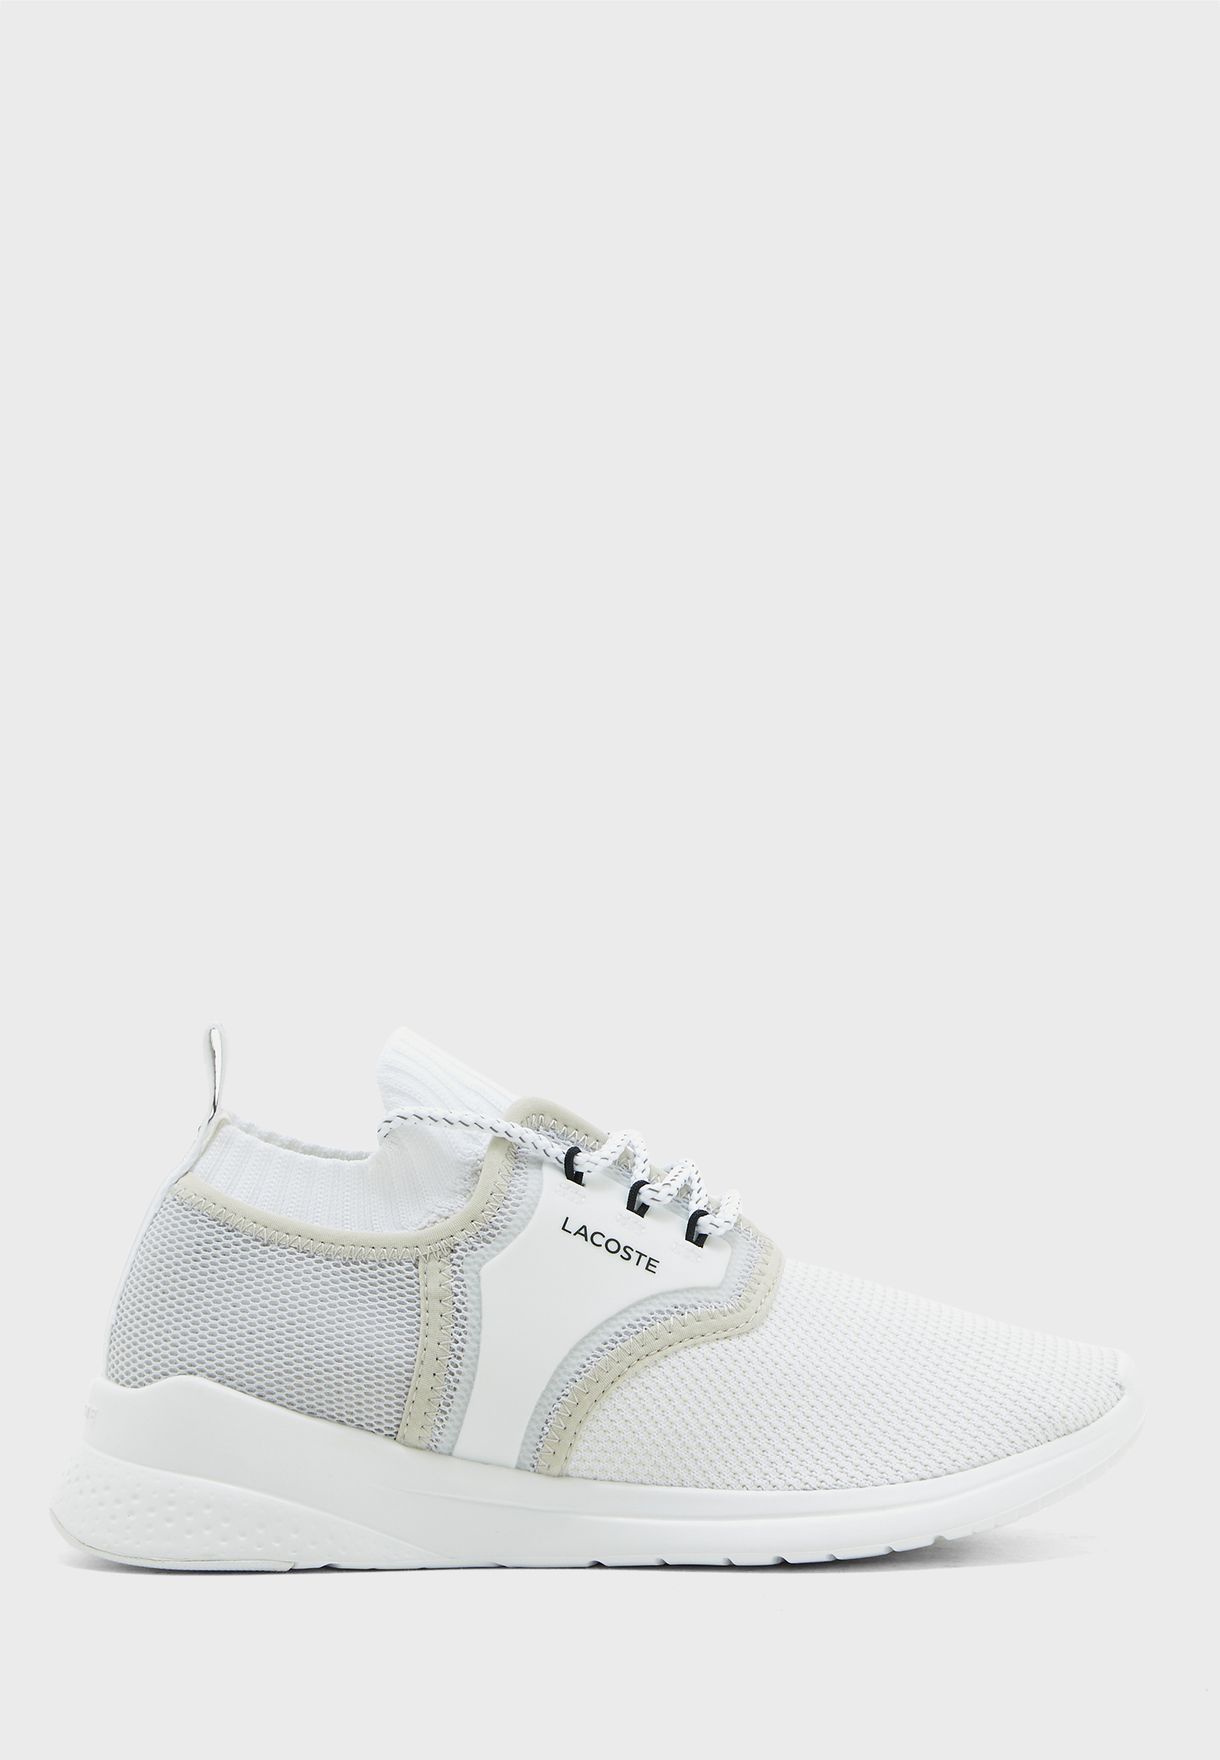 lacoste white high tops